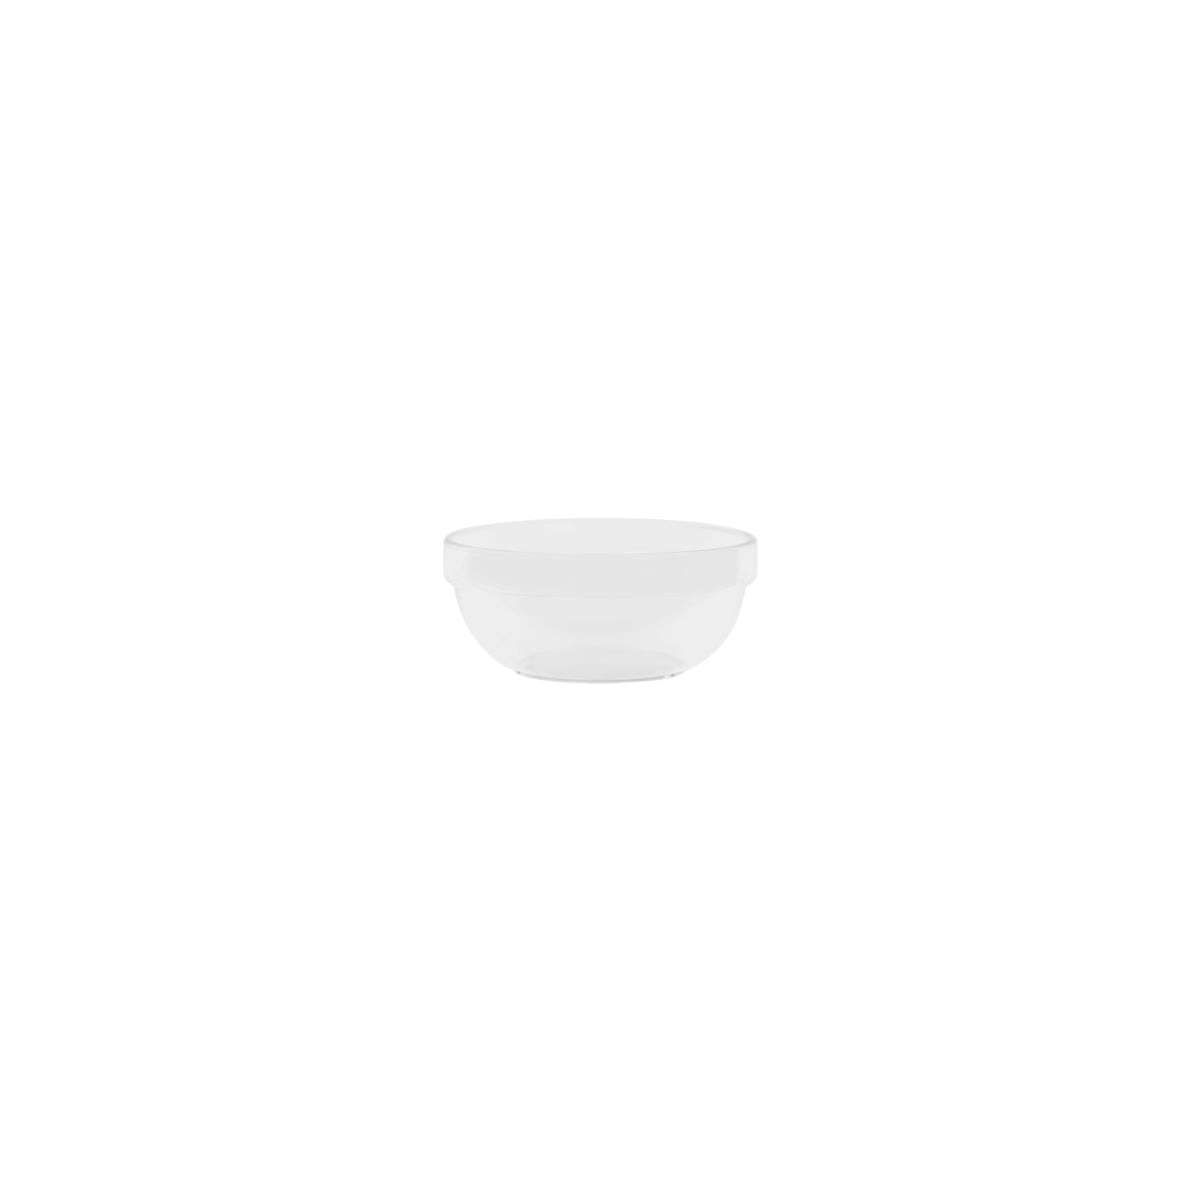 ROLTEXR910 Roltex Polycarbonate Salad Dish Clear 110mm Tomkin Australia Hospitality Supplies